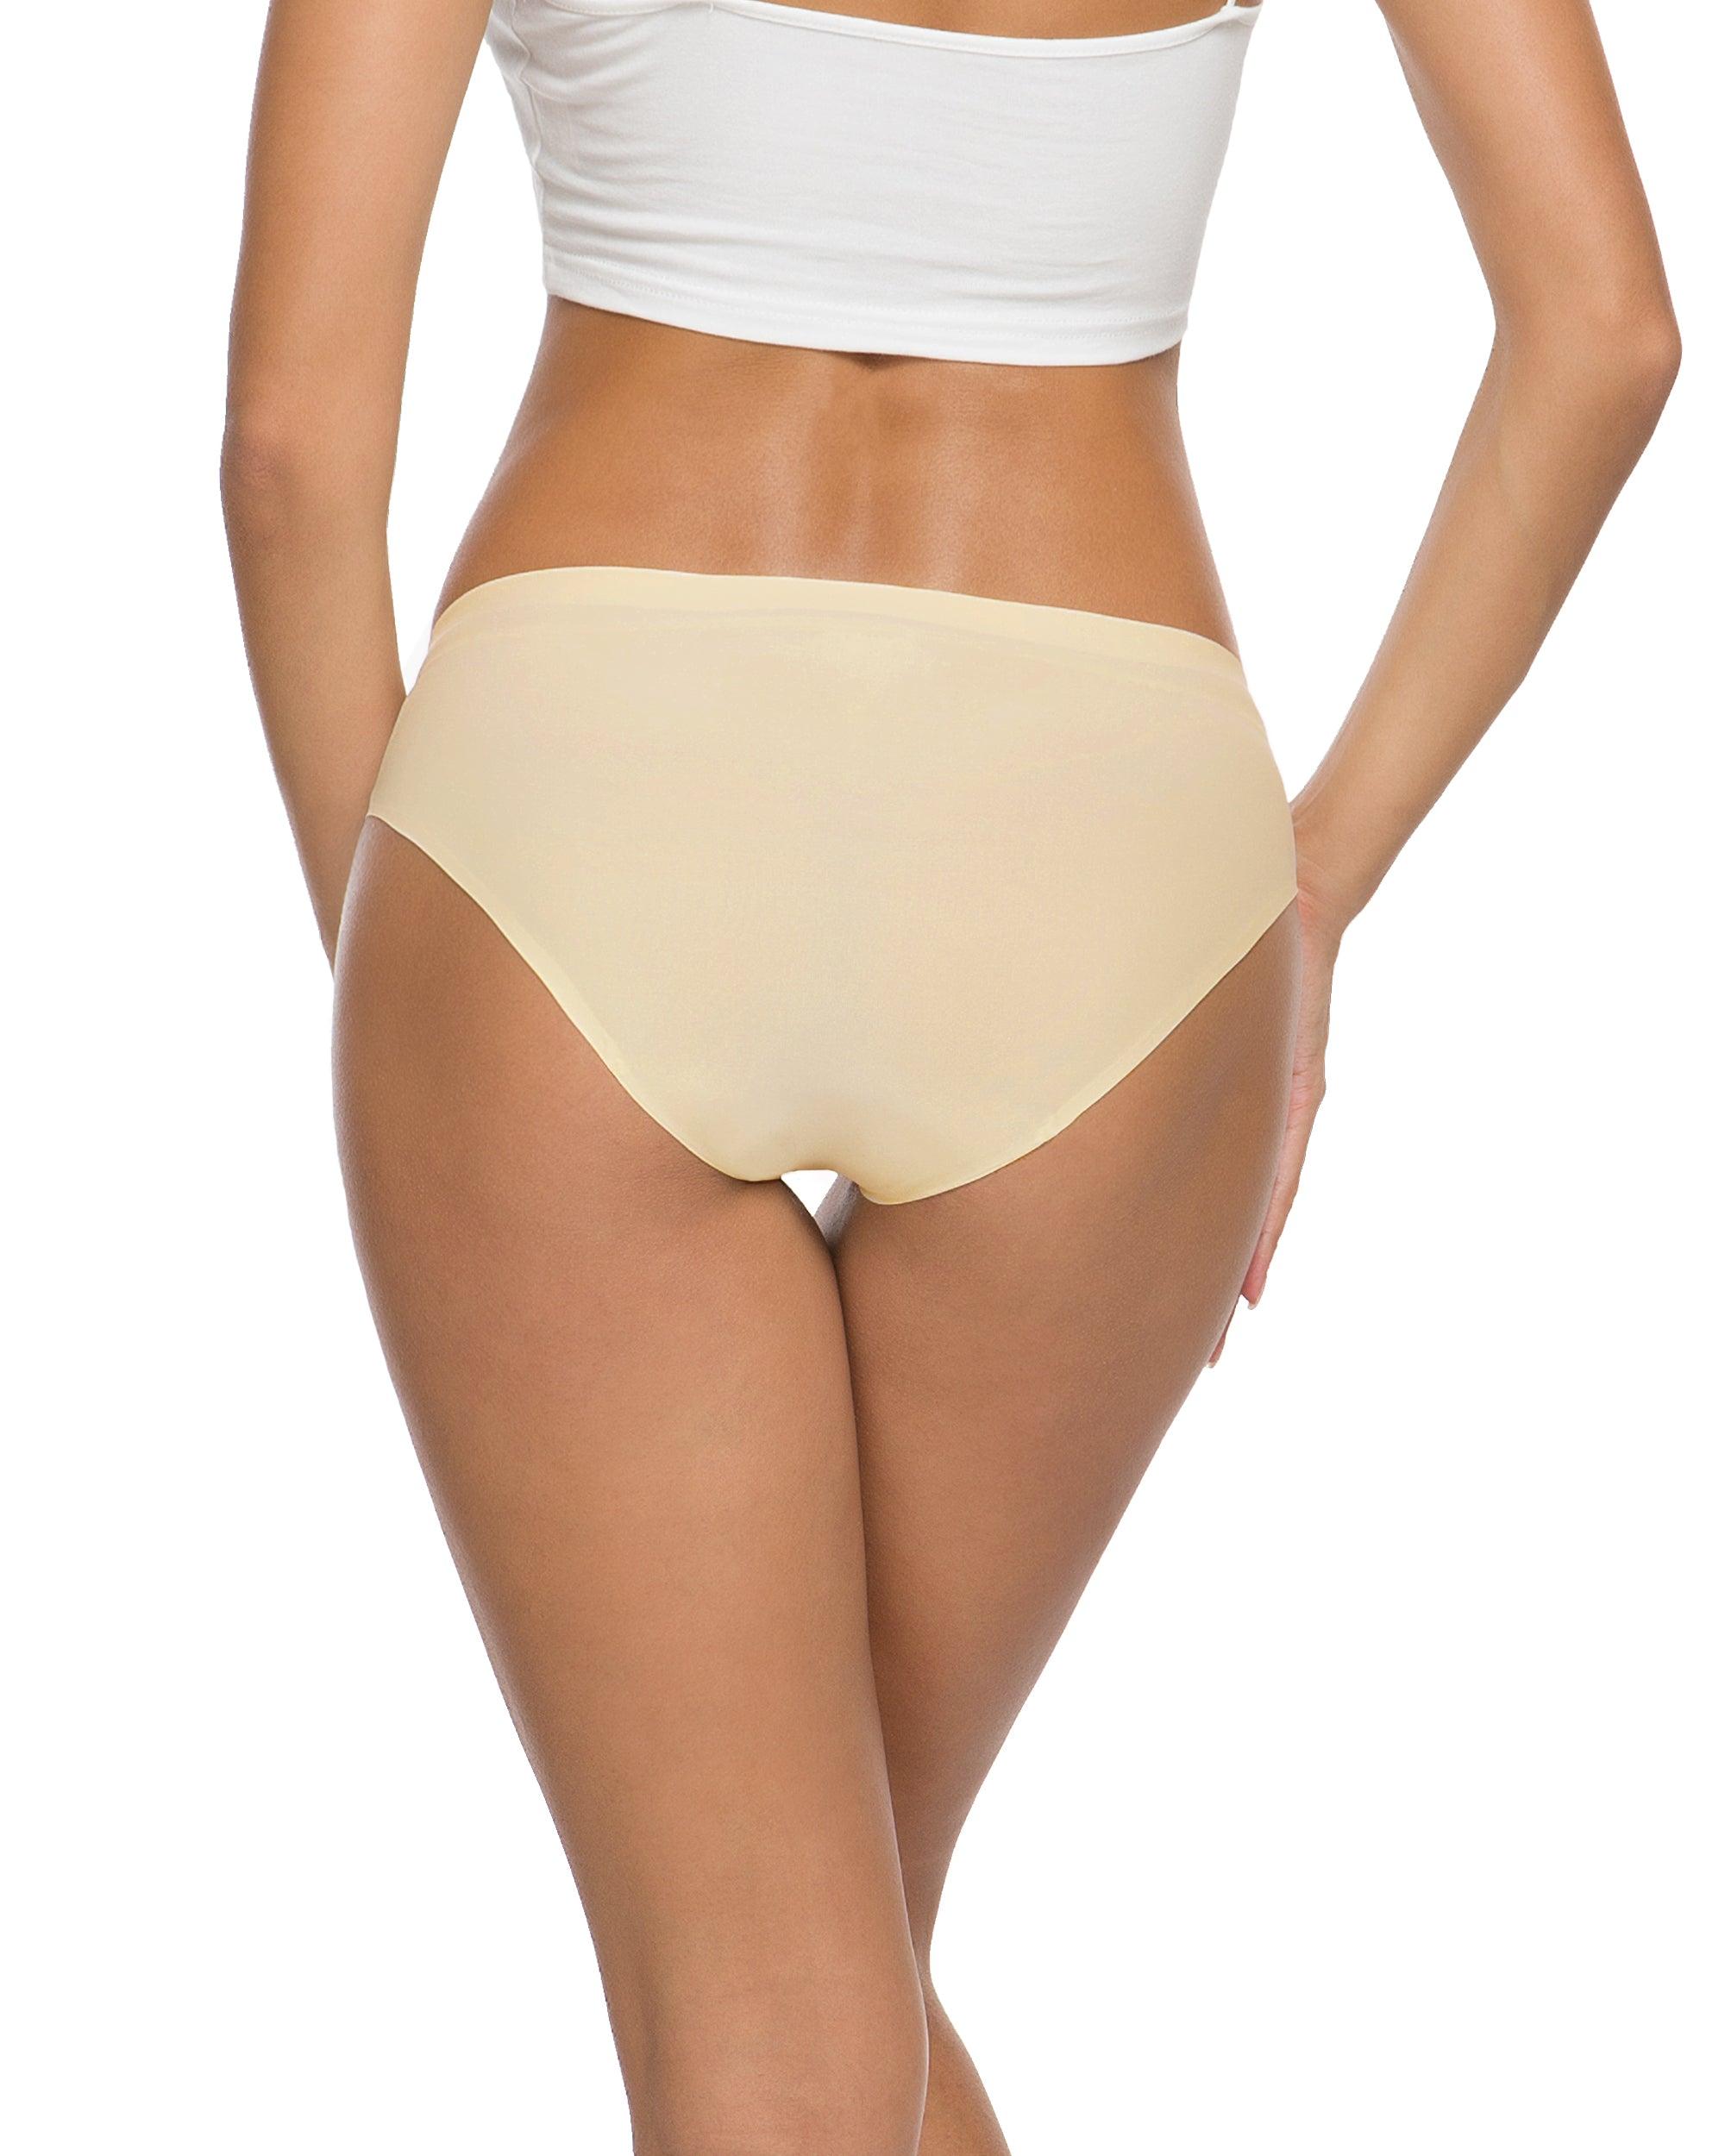 Shapyfy Super Comfy Seamless Women's Panty, Soft Material